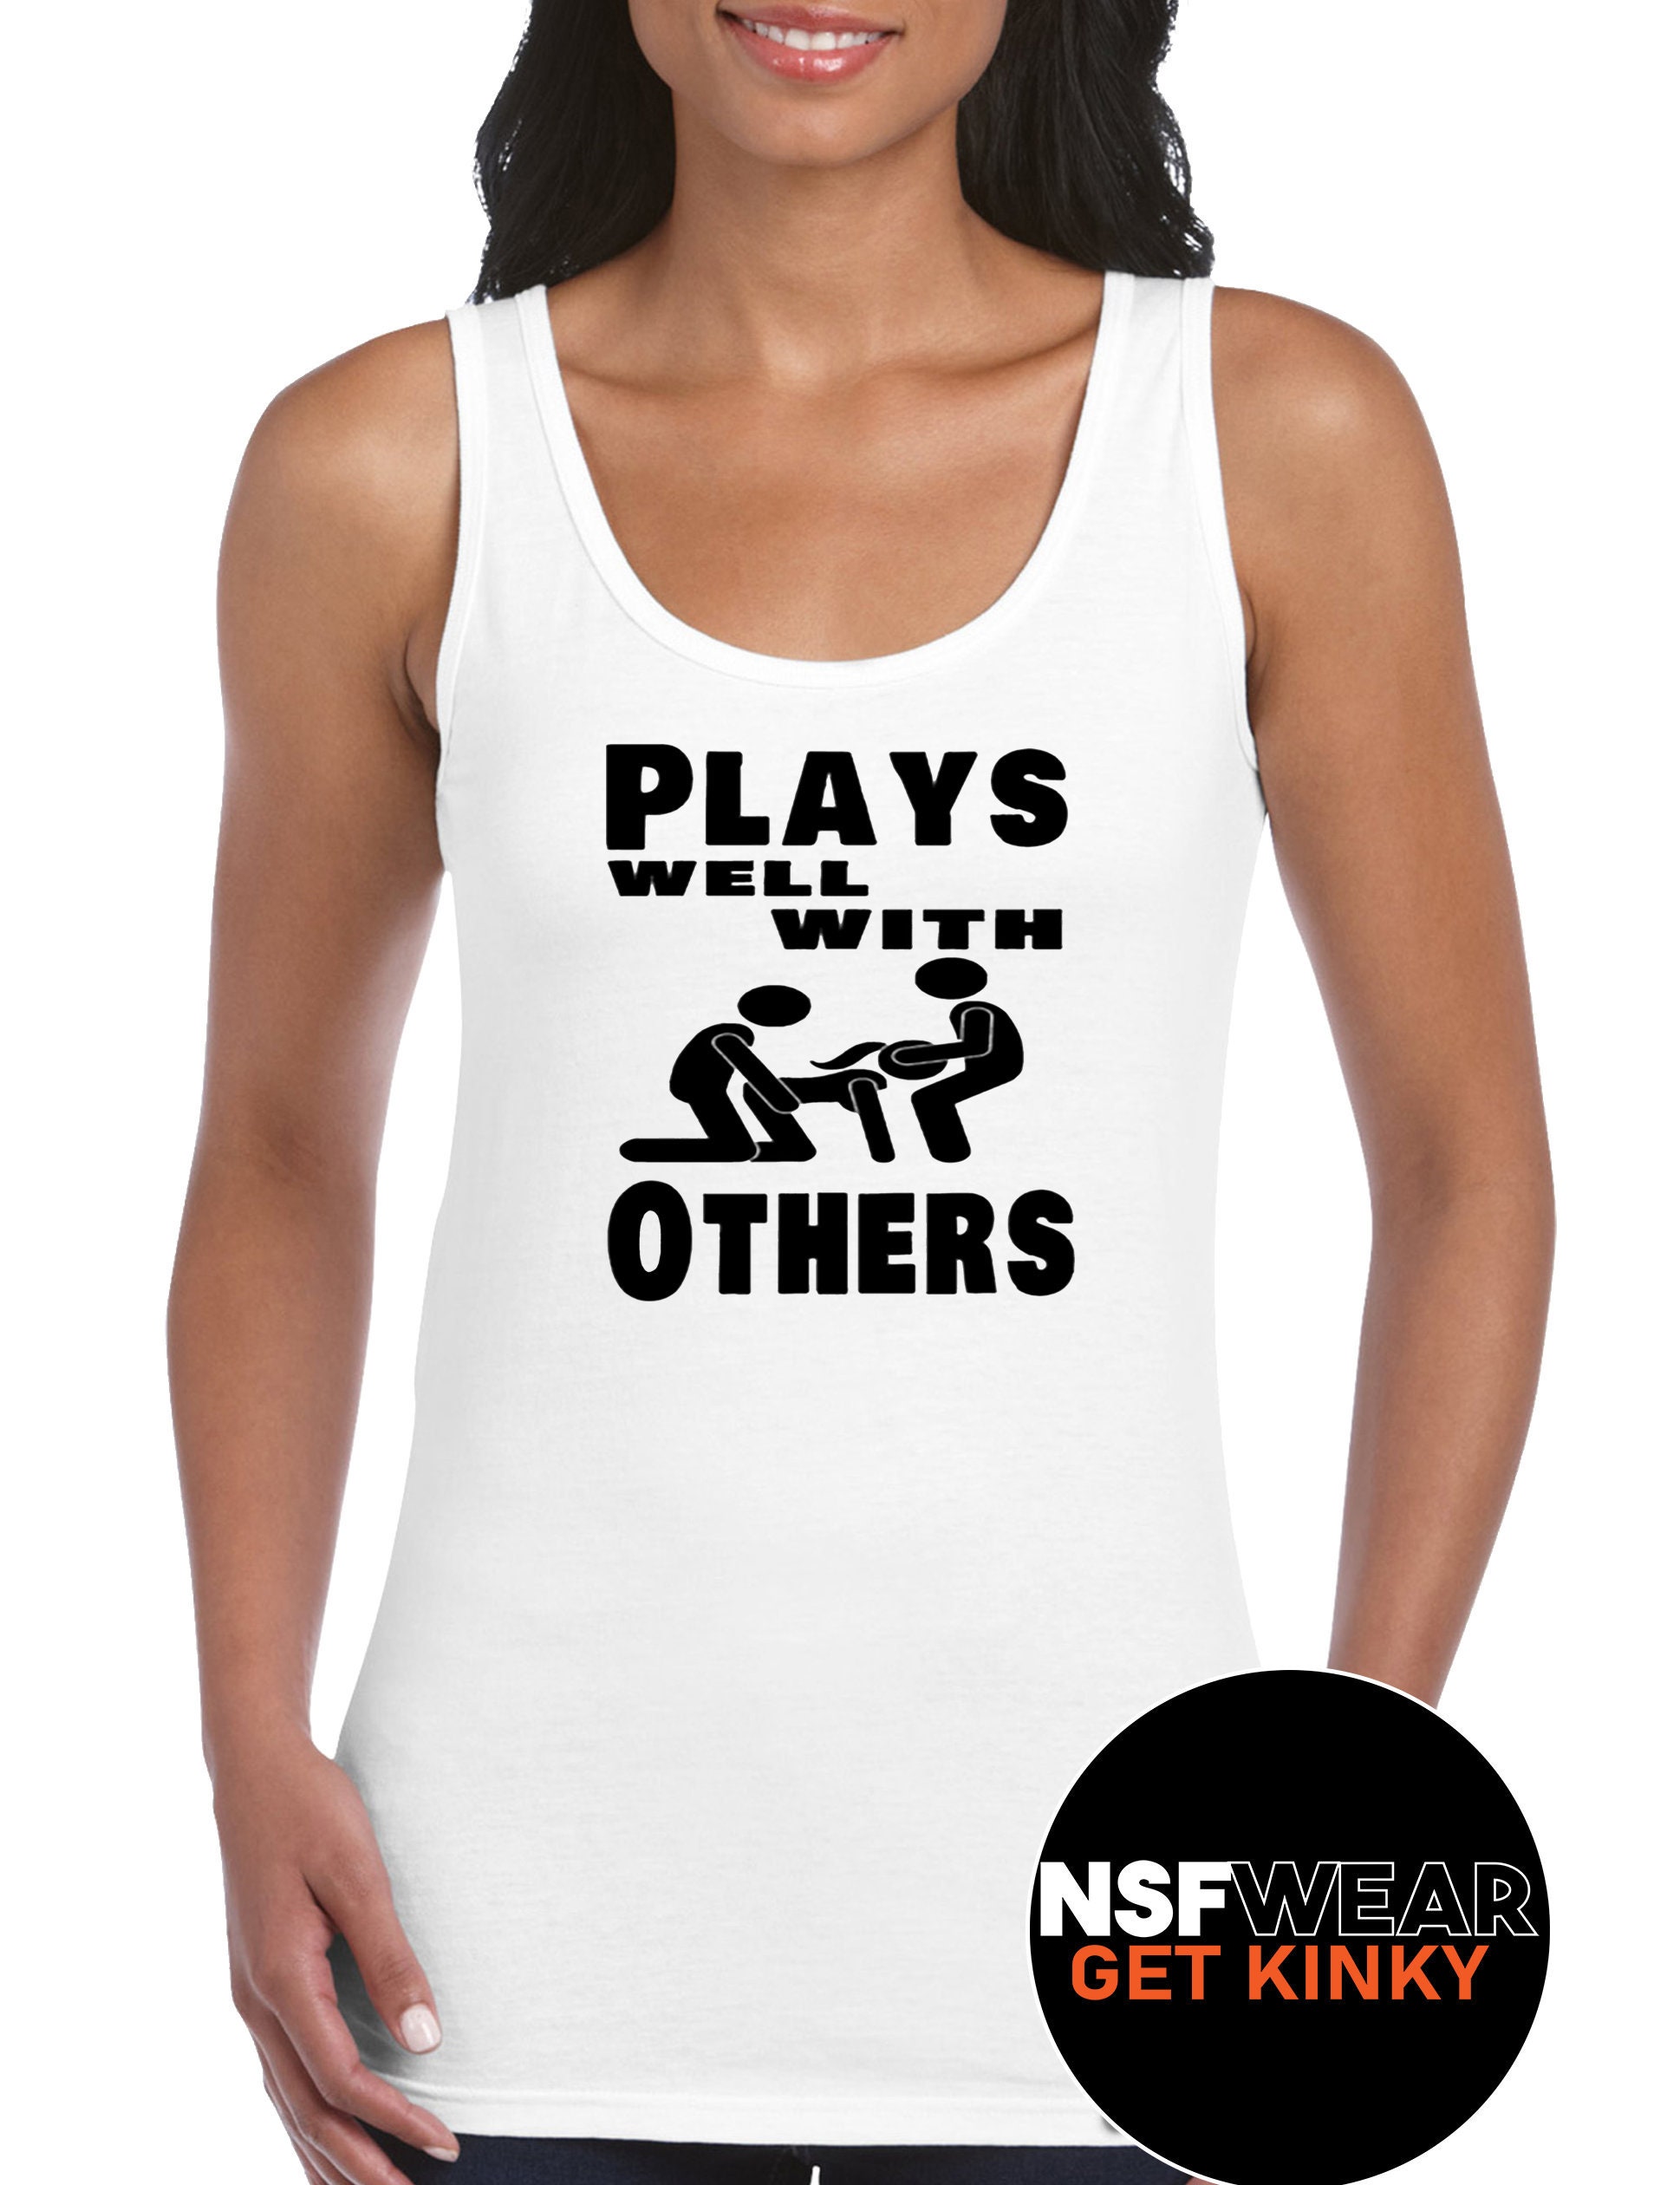 Plays Well With Others Tank T-shirt Cami or Apron Hotwife pic image